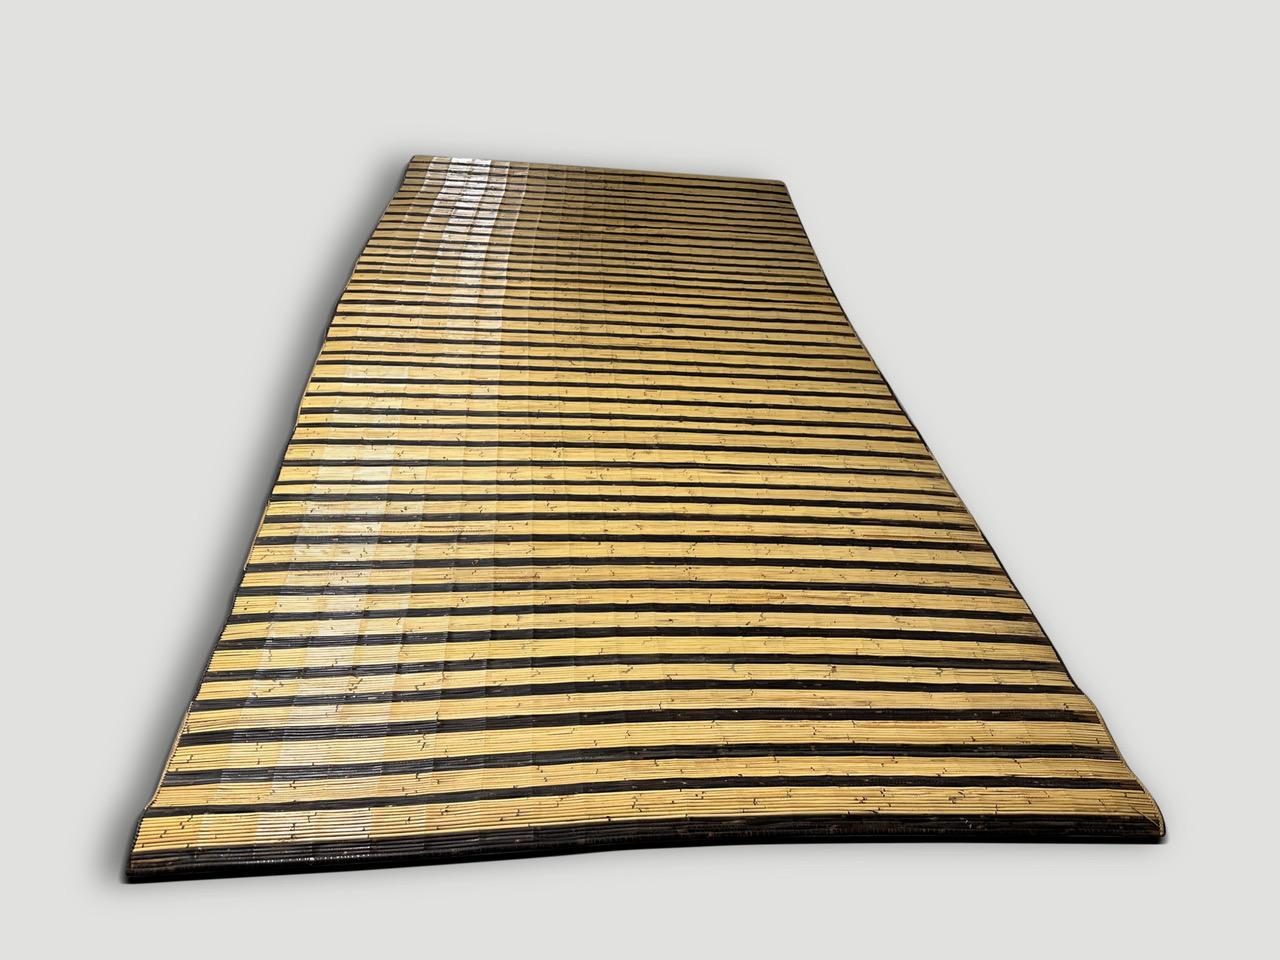 Hand made vintage bamboo mat from Borneo in natural and espresso colors. An unusual long size and unique two toned.

Andrianna Shamaris. The Leader In Modern Organic Design.